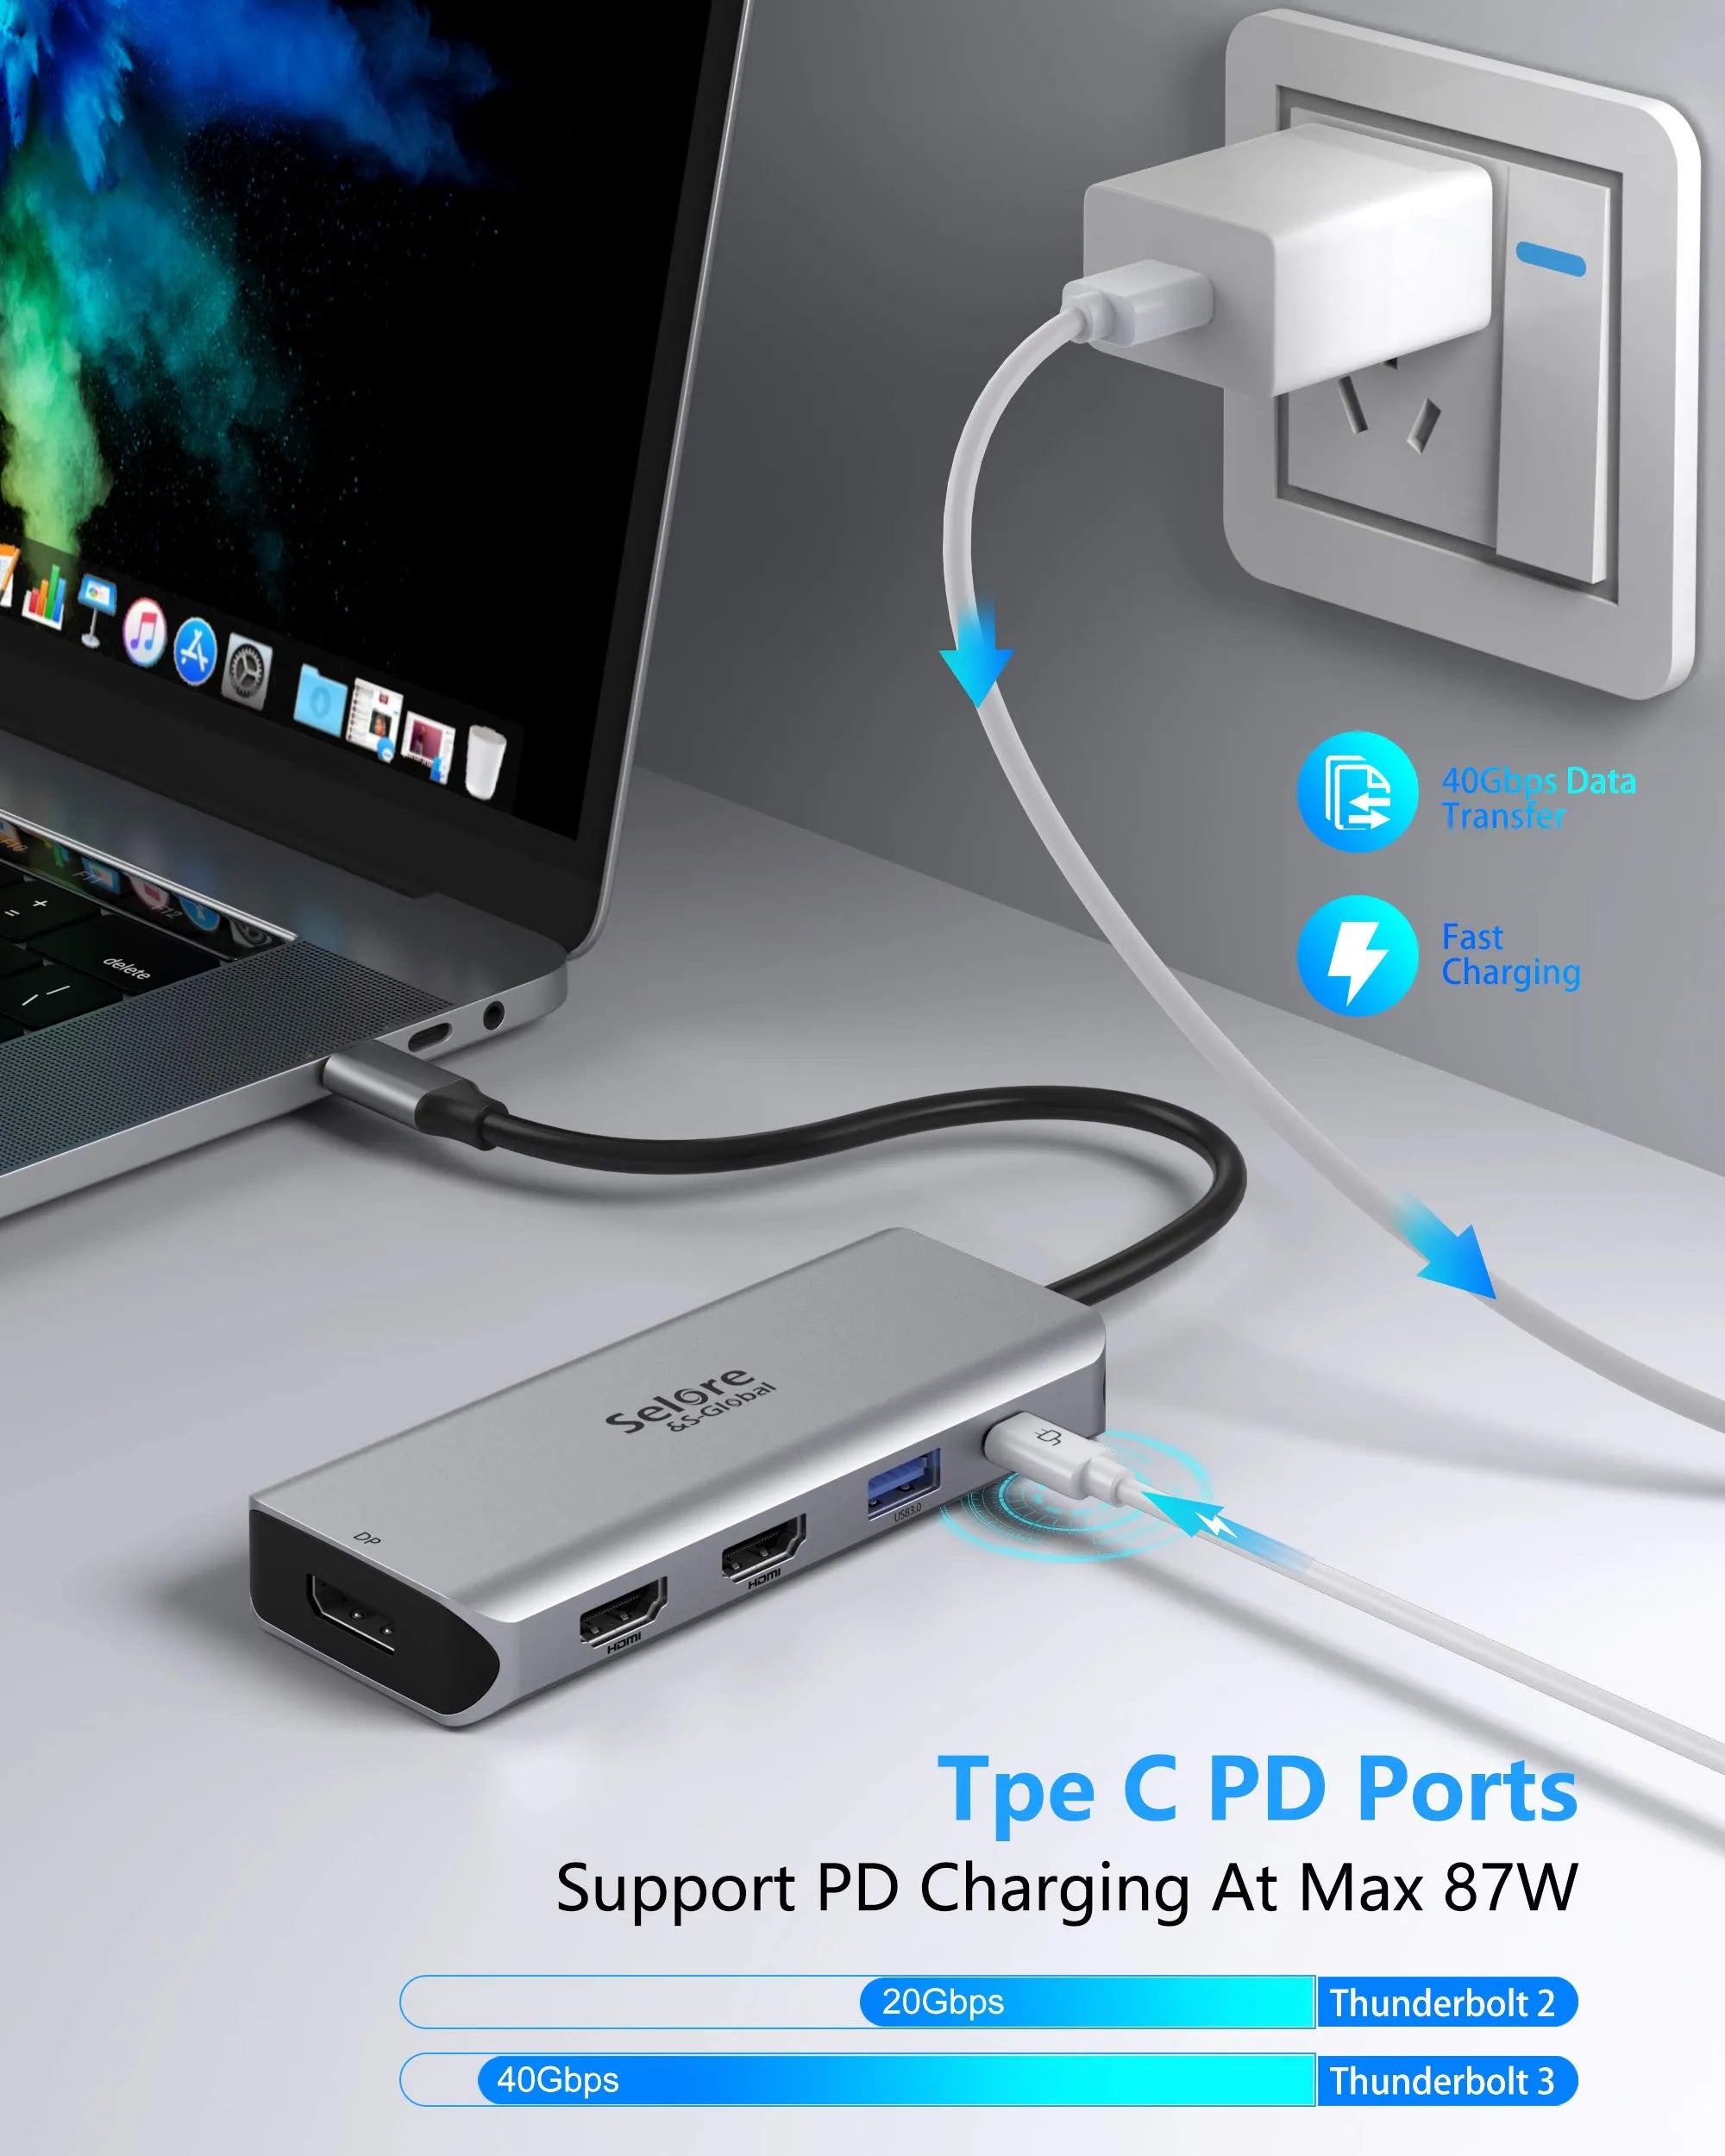 MacBook Pro Docking Station Dual Monitor MacBook Pro HDMI Adapter,9 in 1  USB C Adapters for MacBook Pro Air Mac HDMI Dock Dongle Dual USB C to Dual